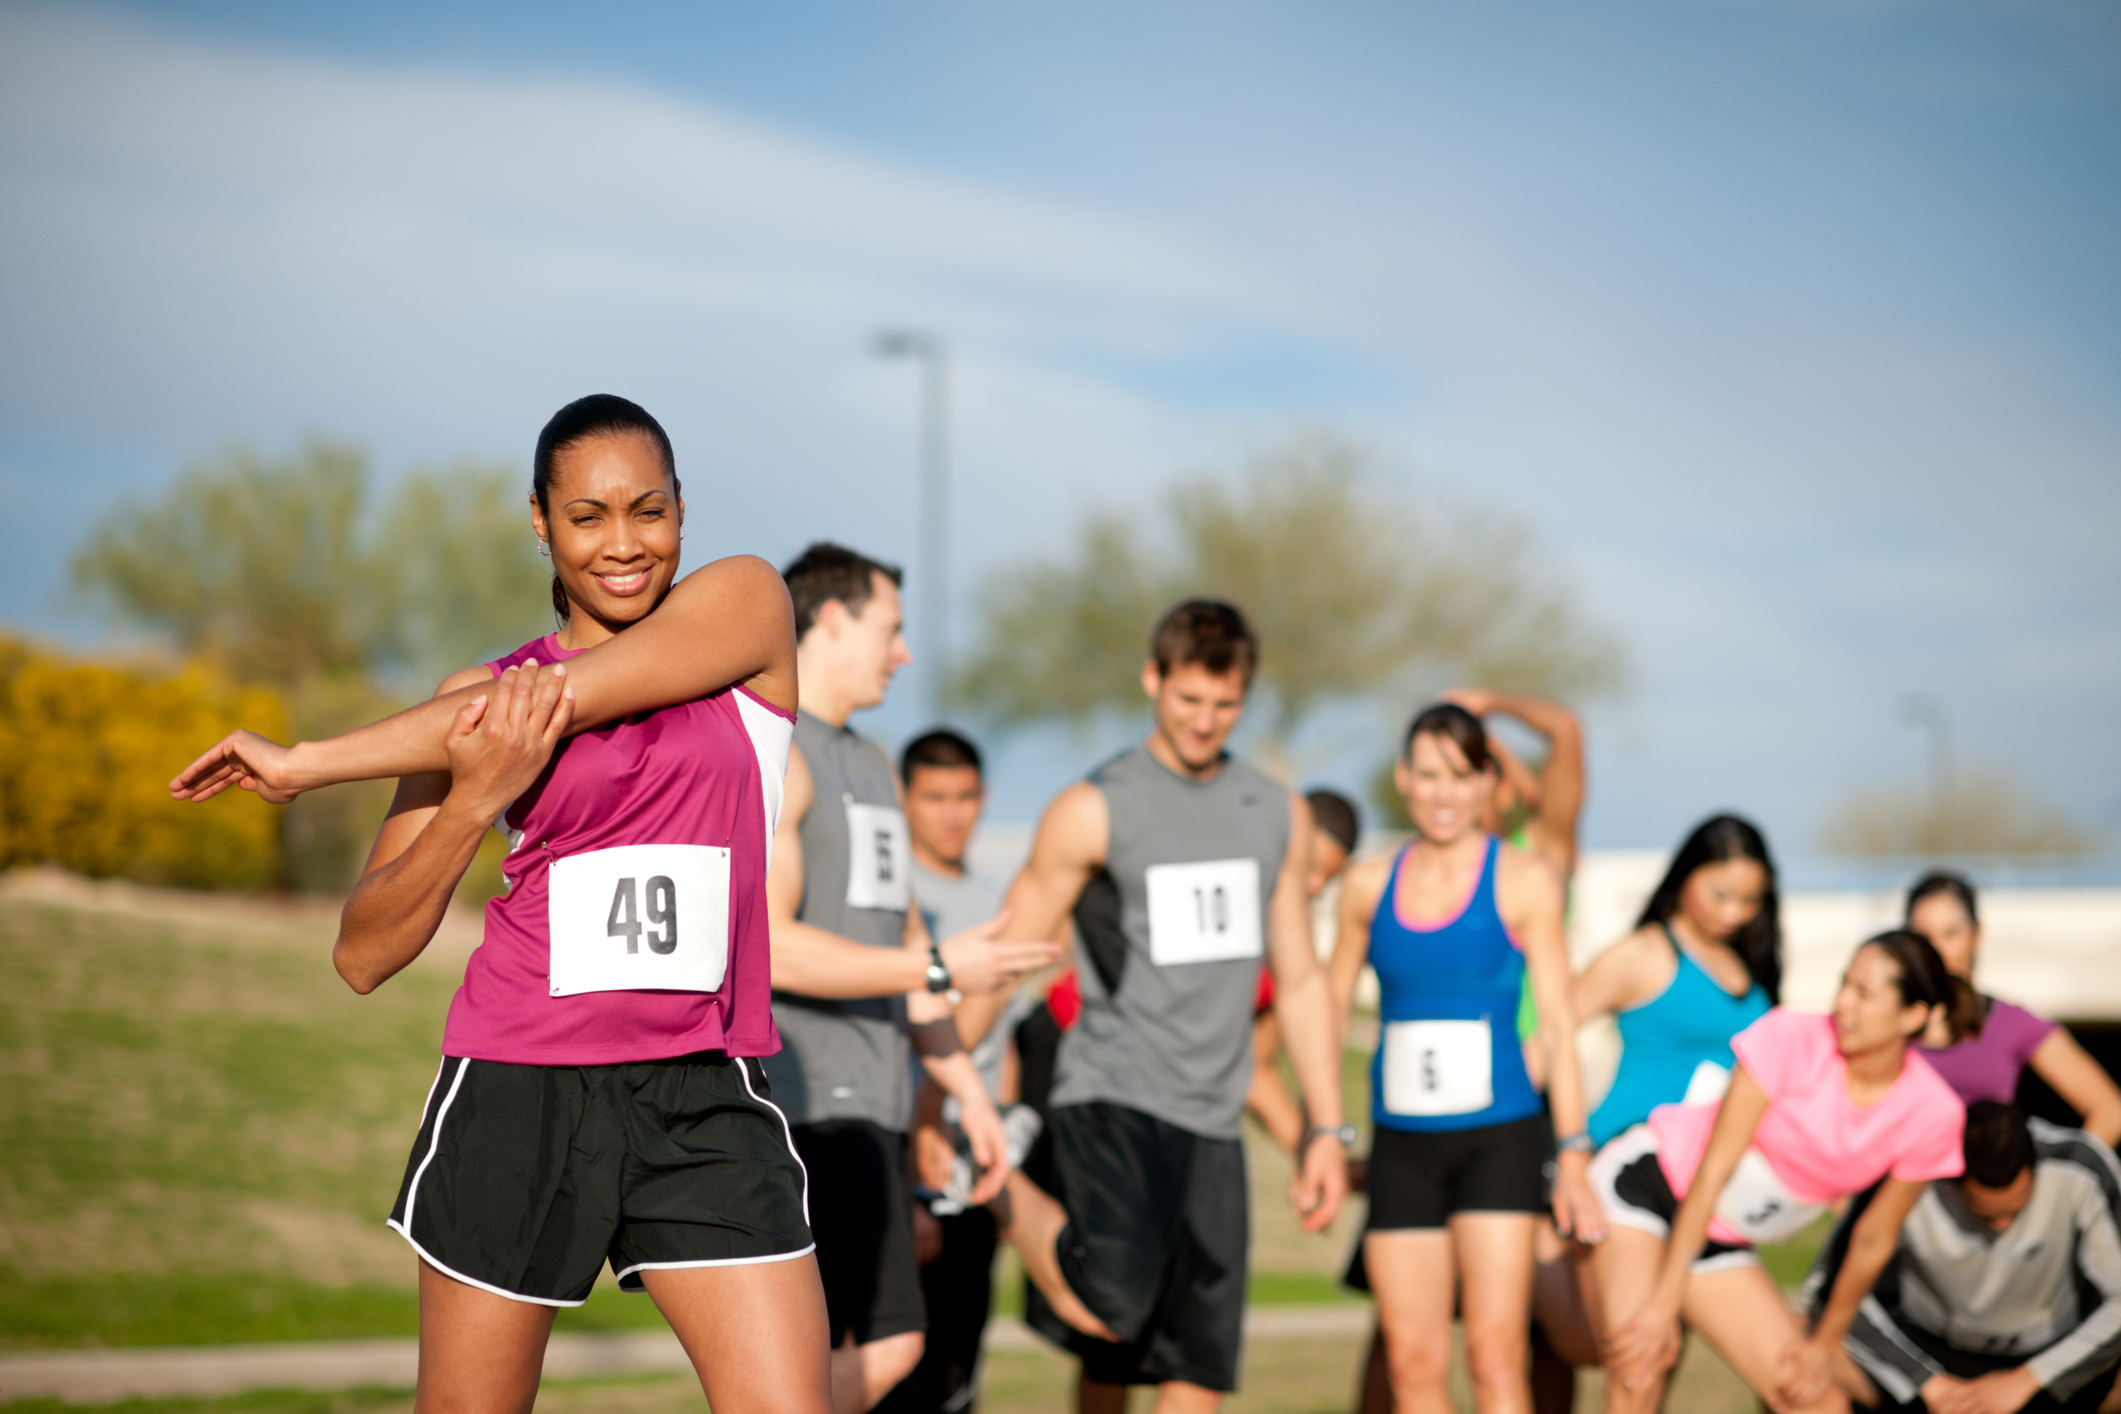 A stock photo of runners preparing to start a race.